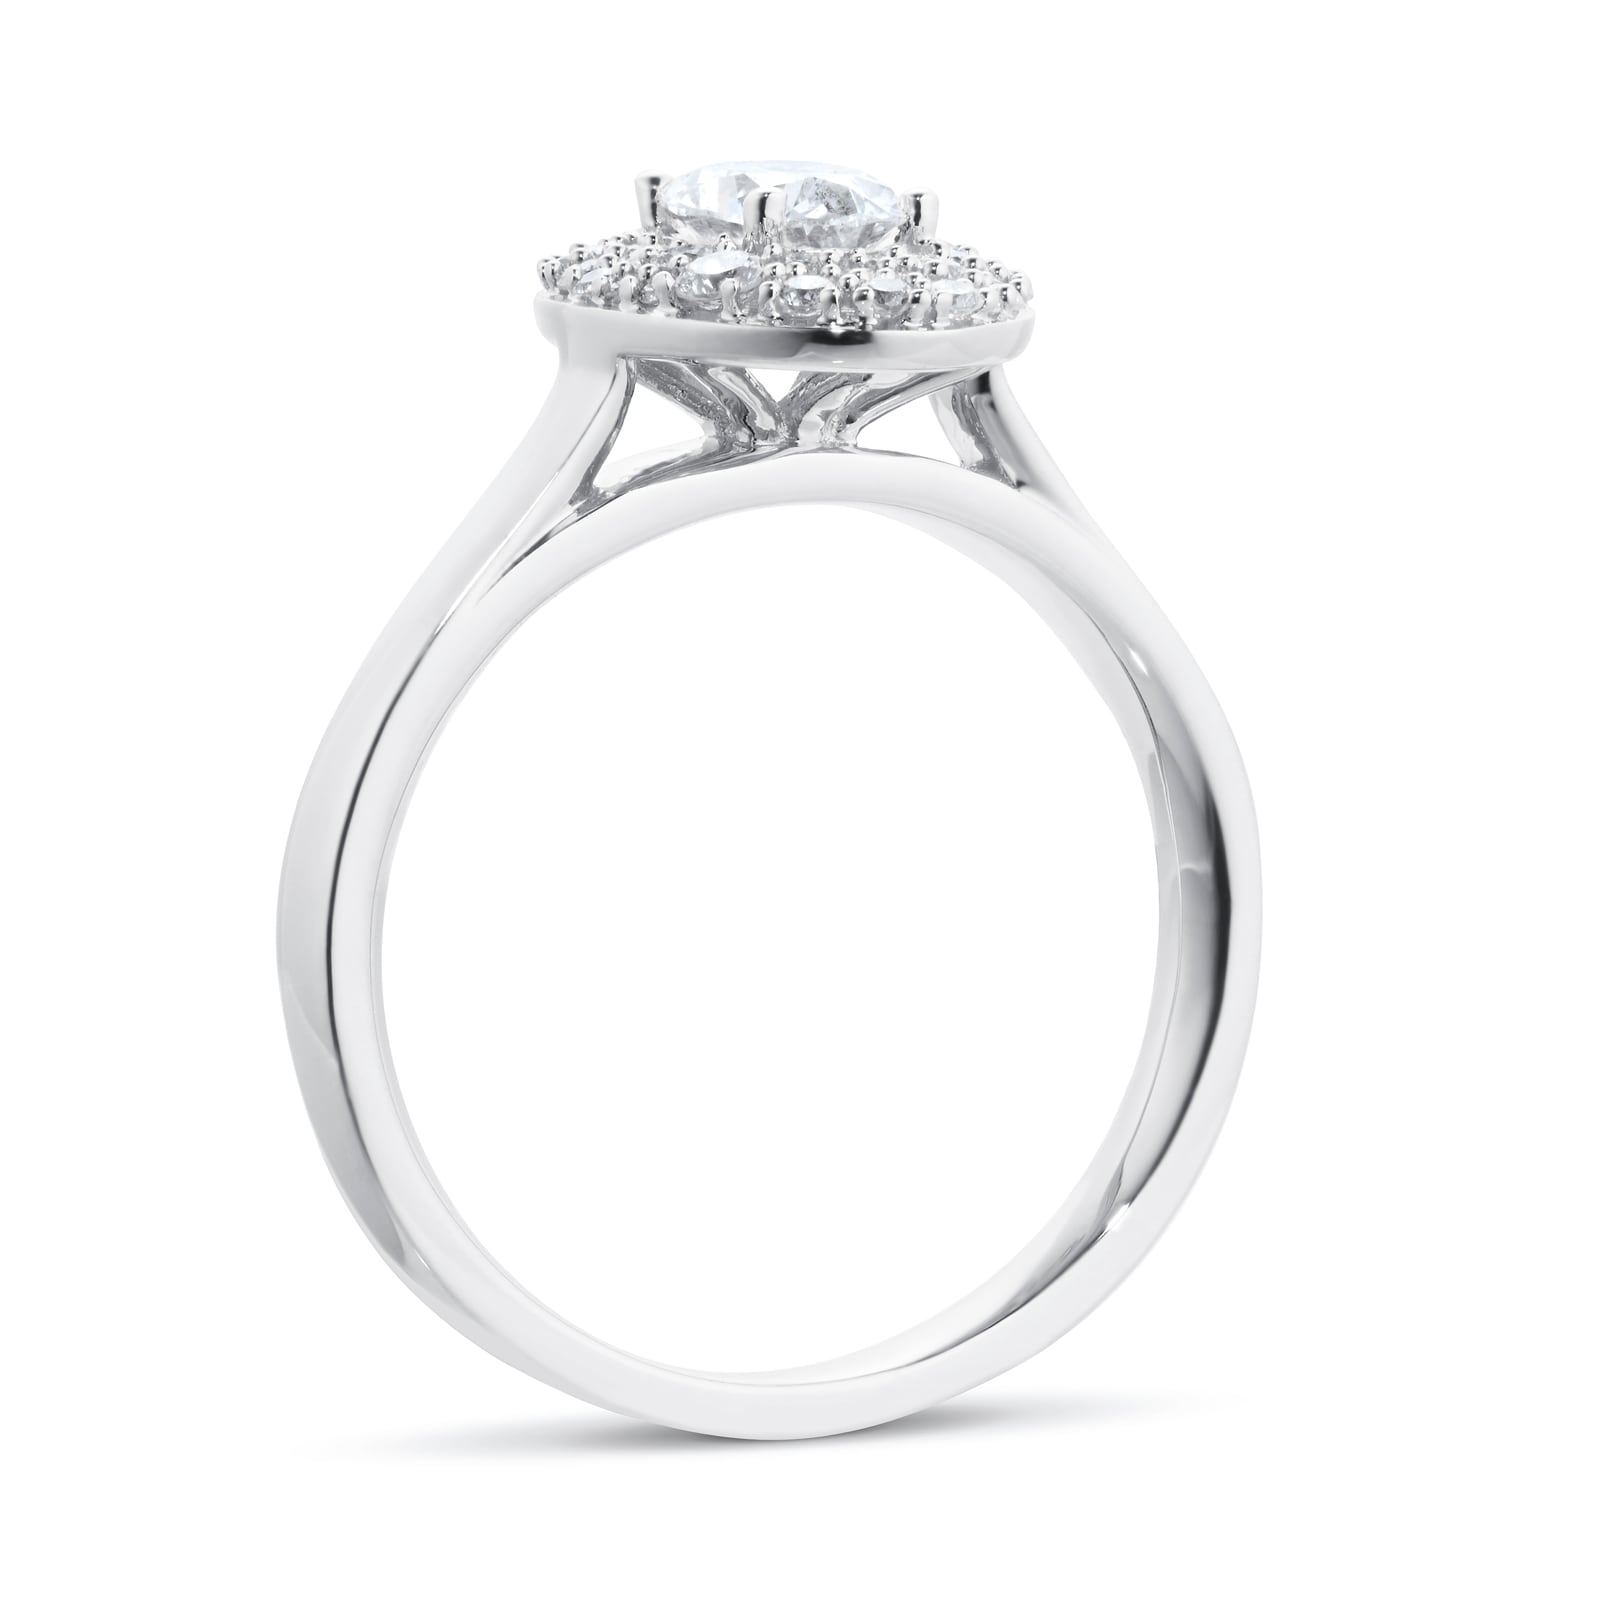 Oval Engagement Rings, Solitaire & Halo Oval Diamond Rings Online UK ...